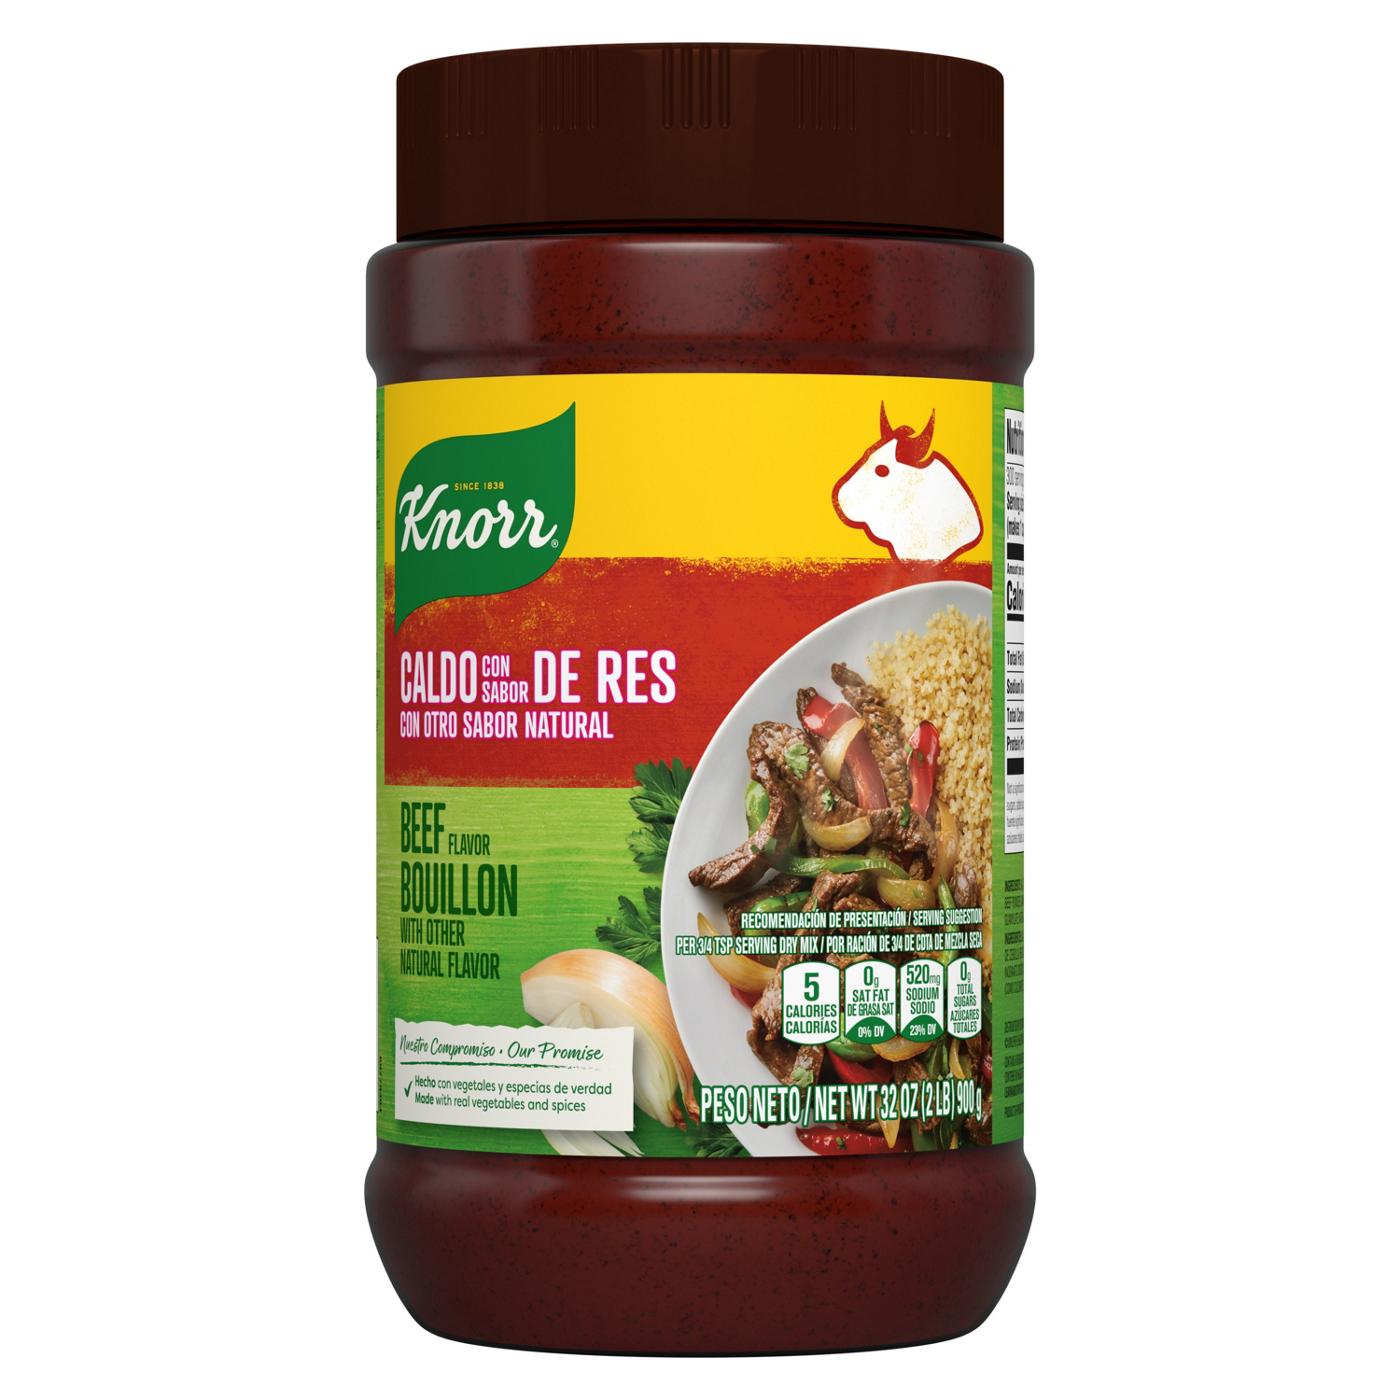 Knorr Granulated Bouillon Beef Flavor; image 1 of 9